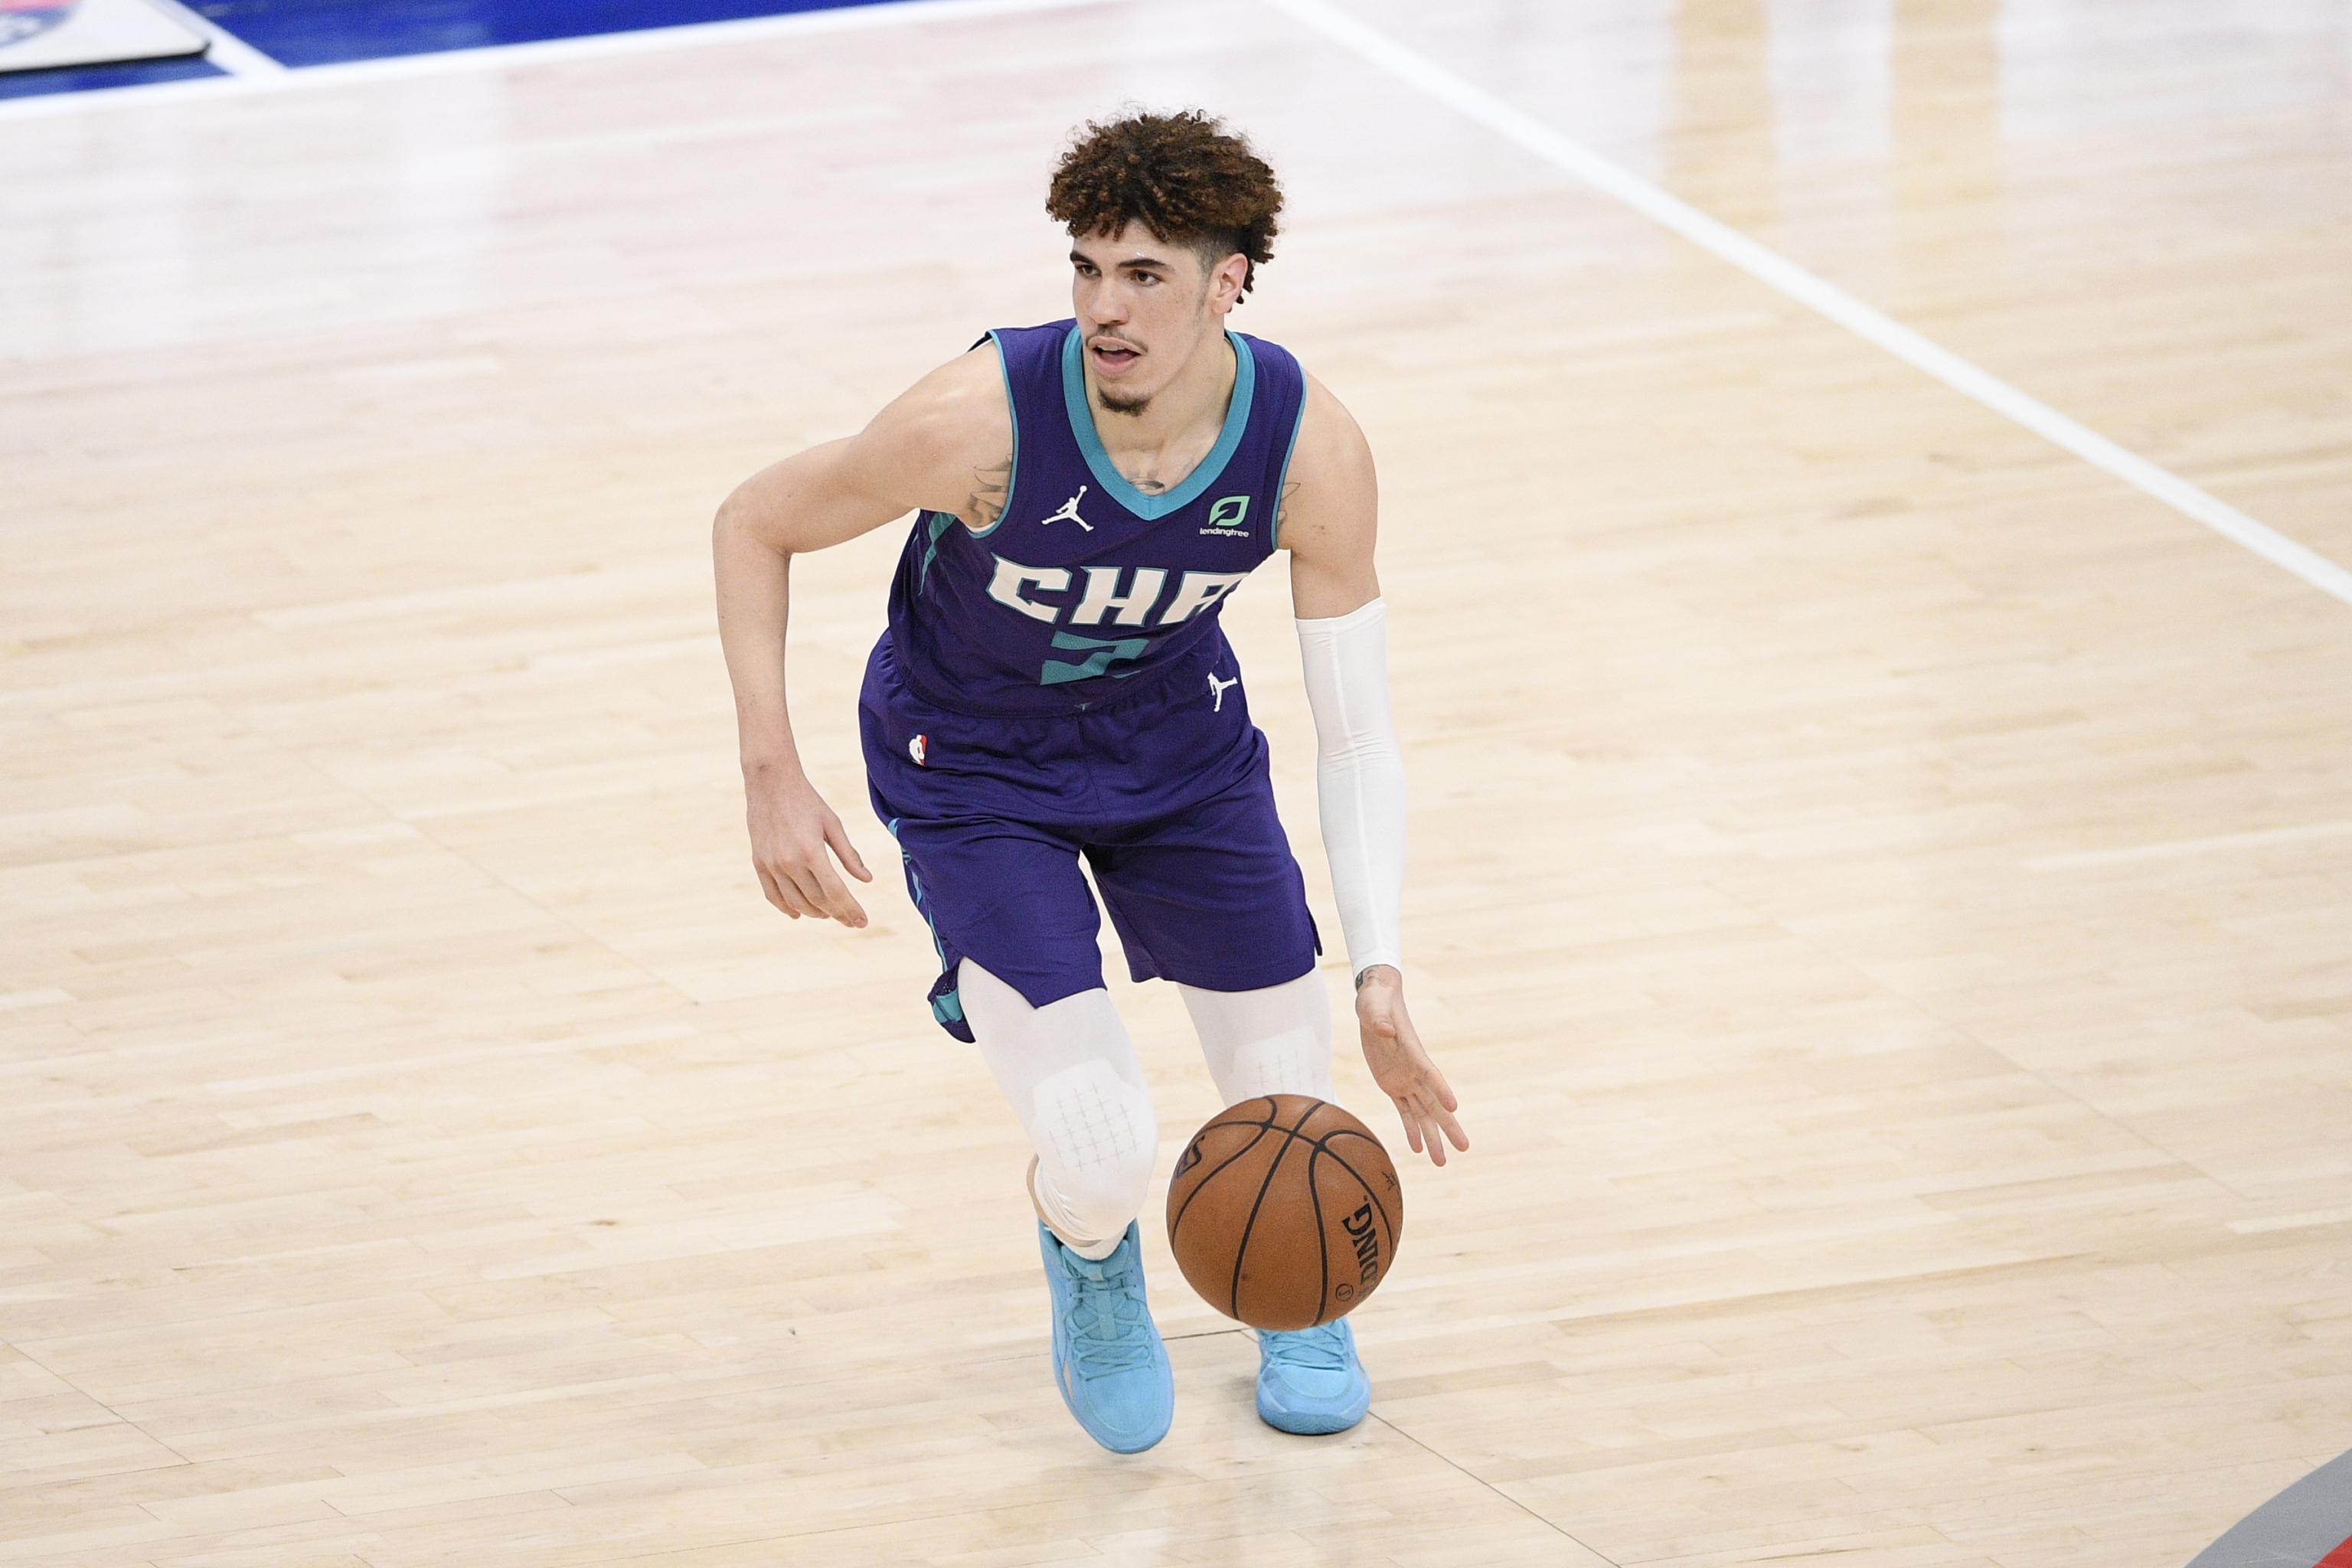 LaMelo Ball: How LaMelo Ball Became the NBA's Most Exciting Player